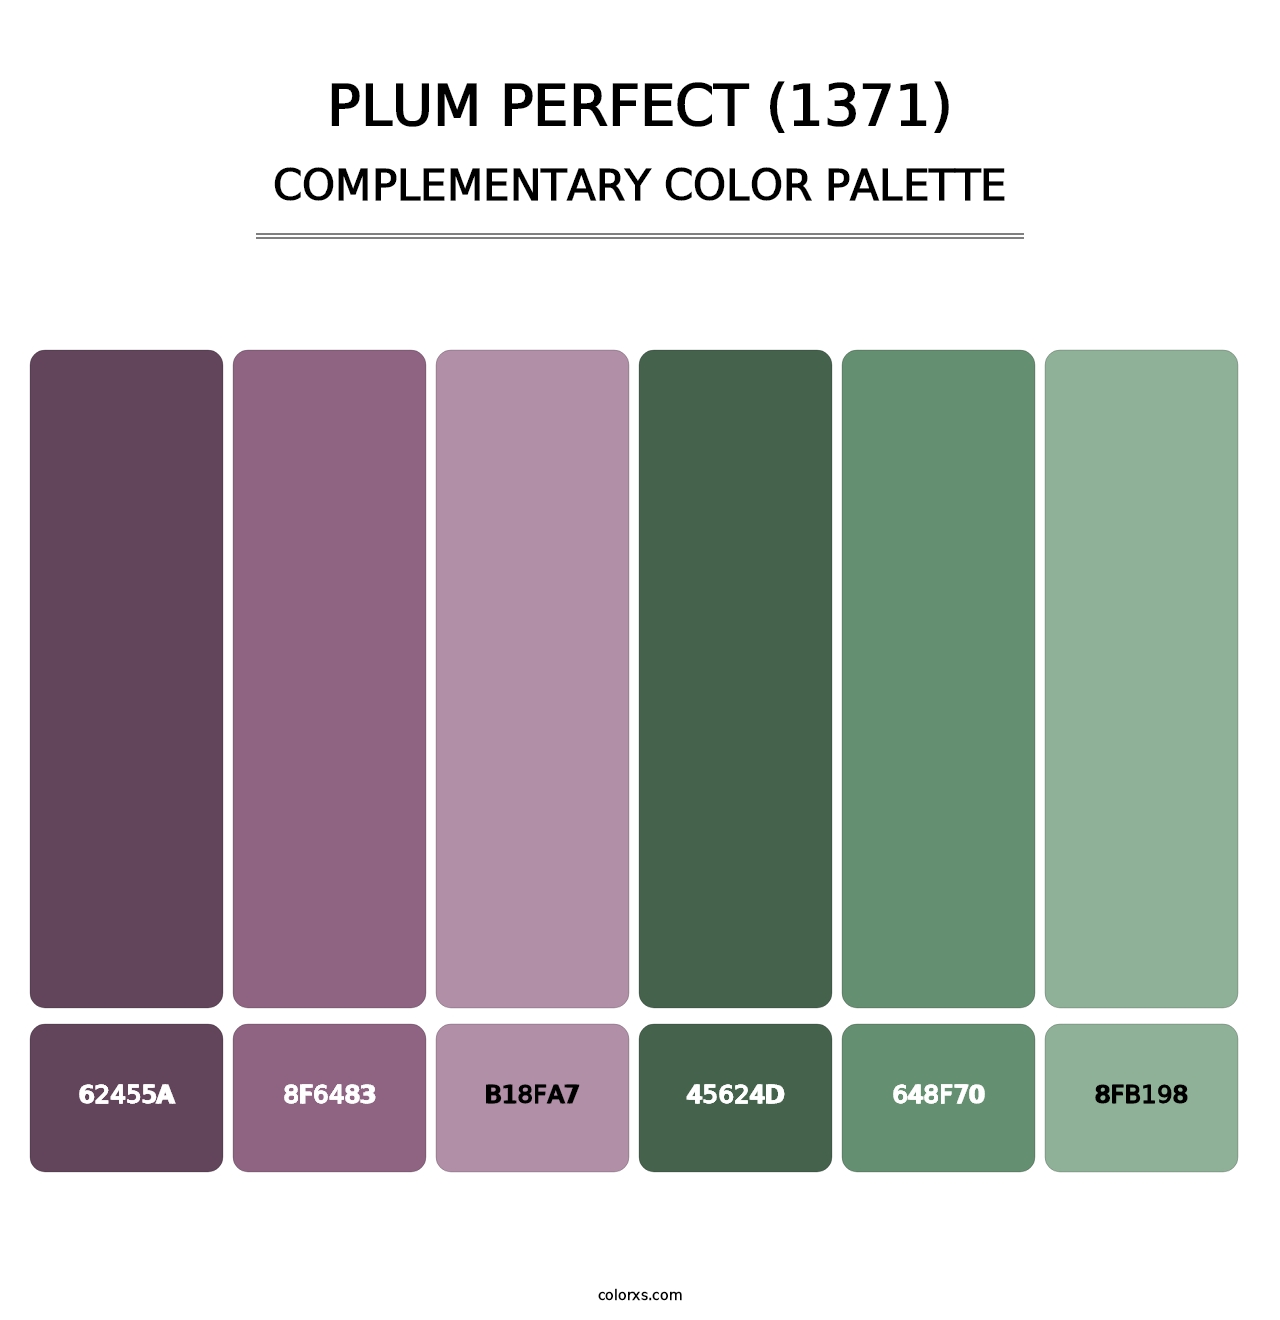 Plum Perfect (1371) - Complementary Color Palette